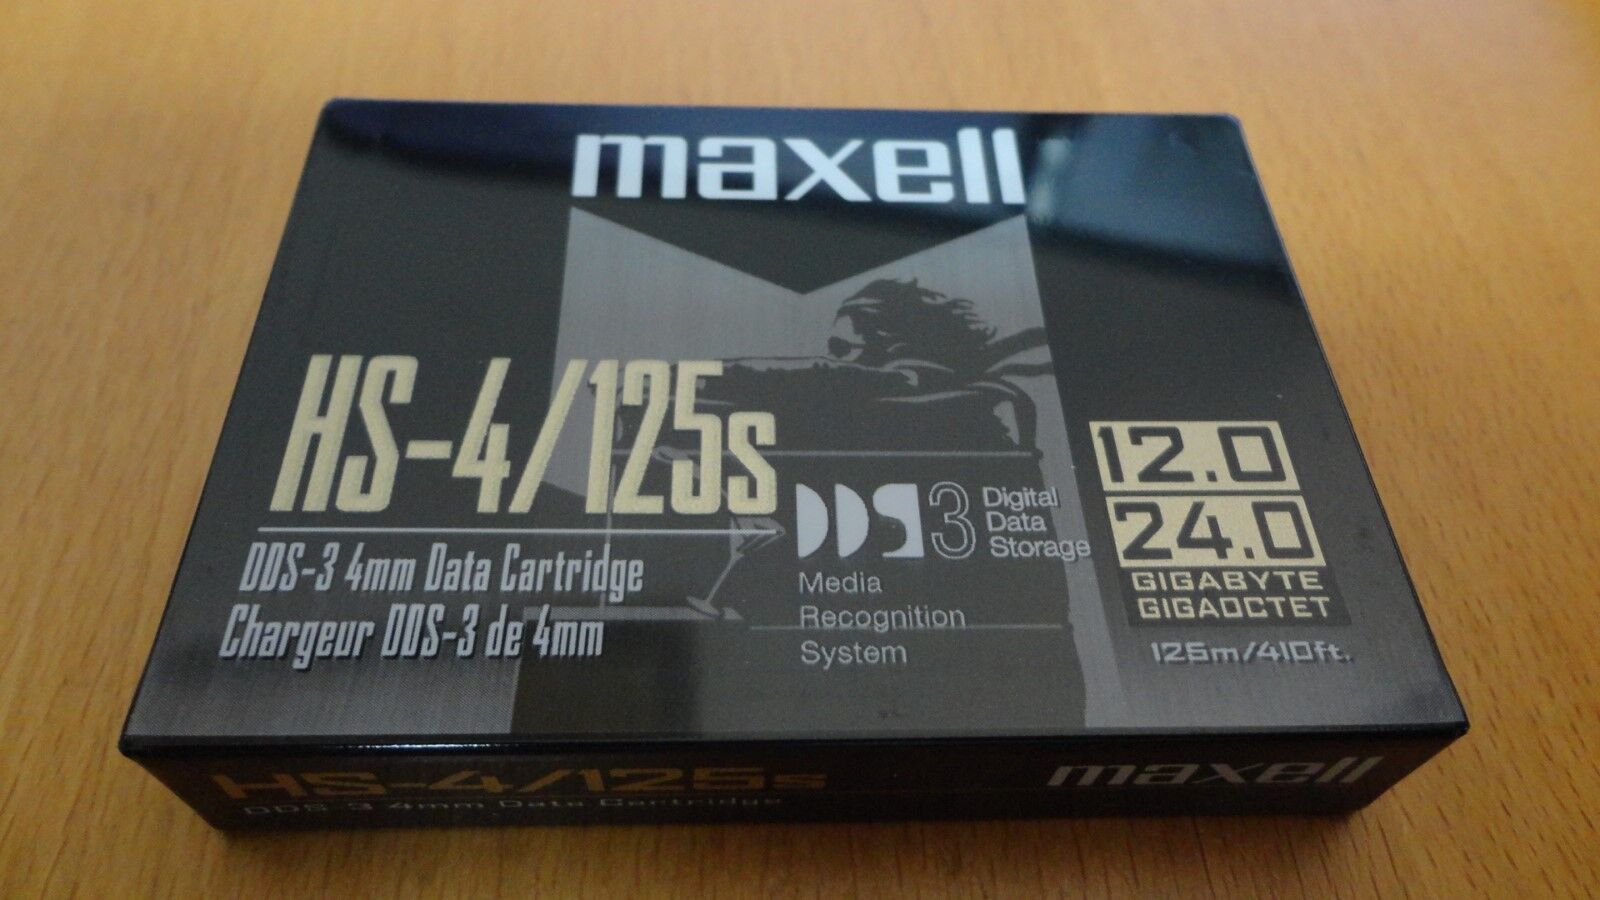 NEW SEALED MAXELL DDS3 4mm DATA Cartridge 125M/12Gb HS4/125S Black Color